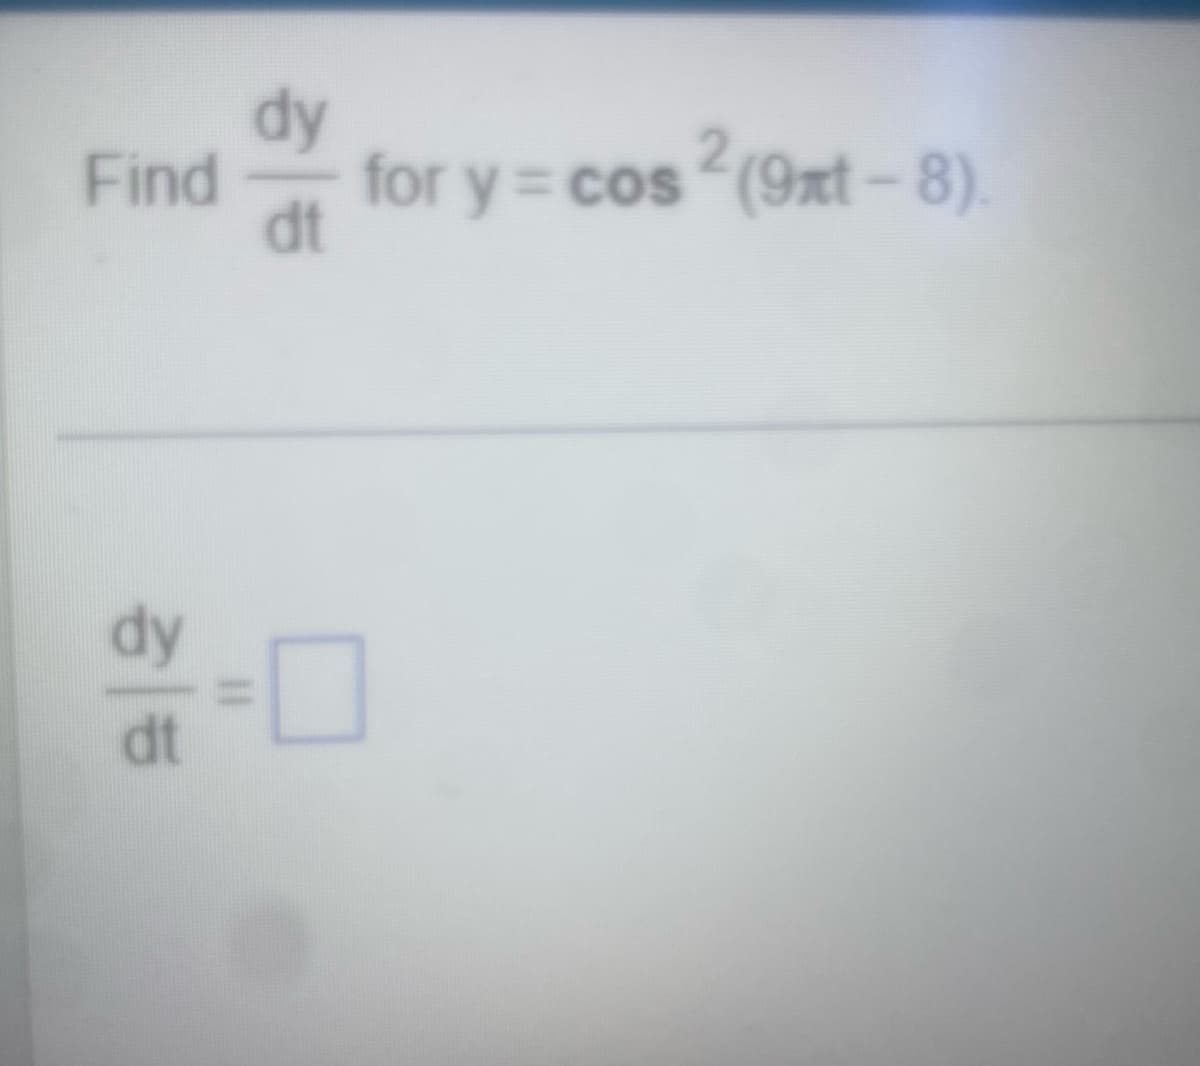 Find for y=cos ²(9xt-8).
dy
dt
dy
dt